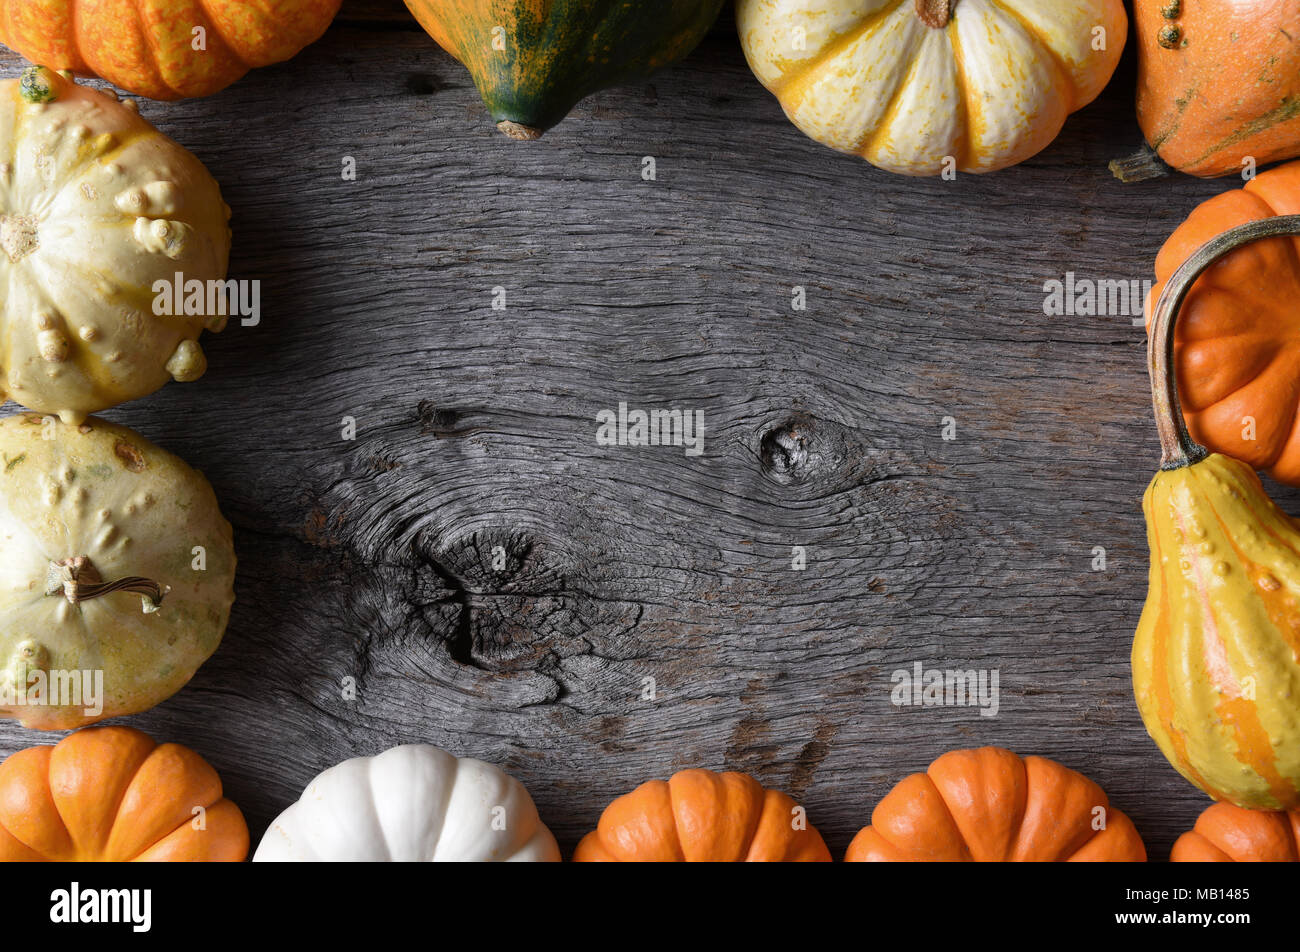 Closeup shot of a group of decorative Pumpkins, Squash and Gourds on a rustic wood table. The vegetables form a frame. Stock Photo